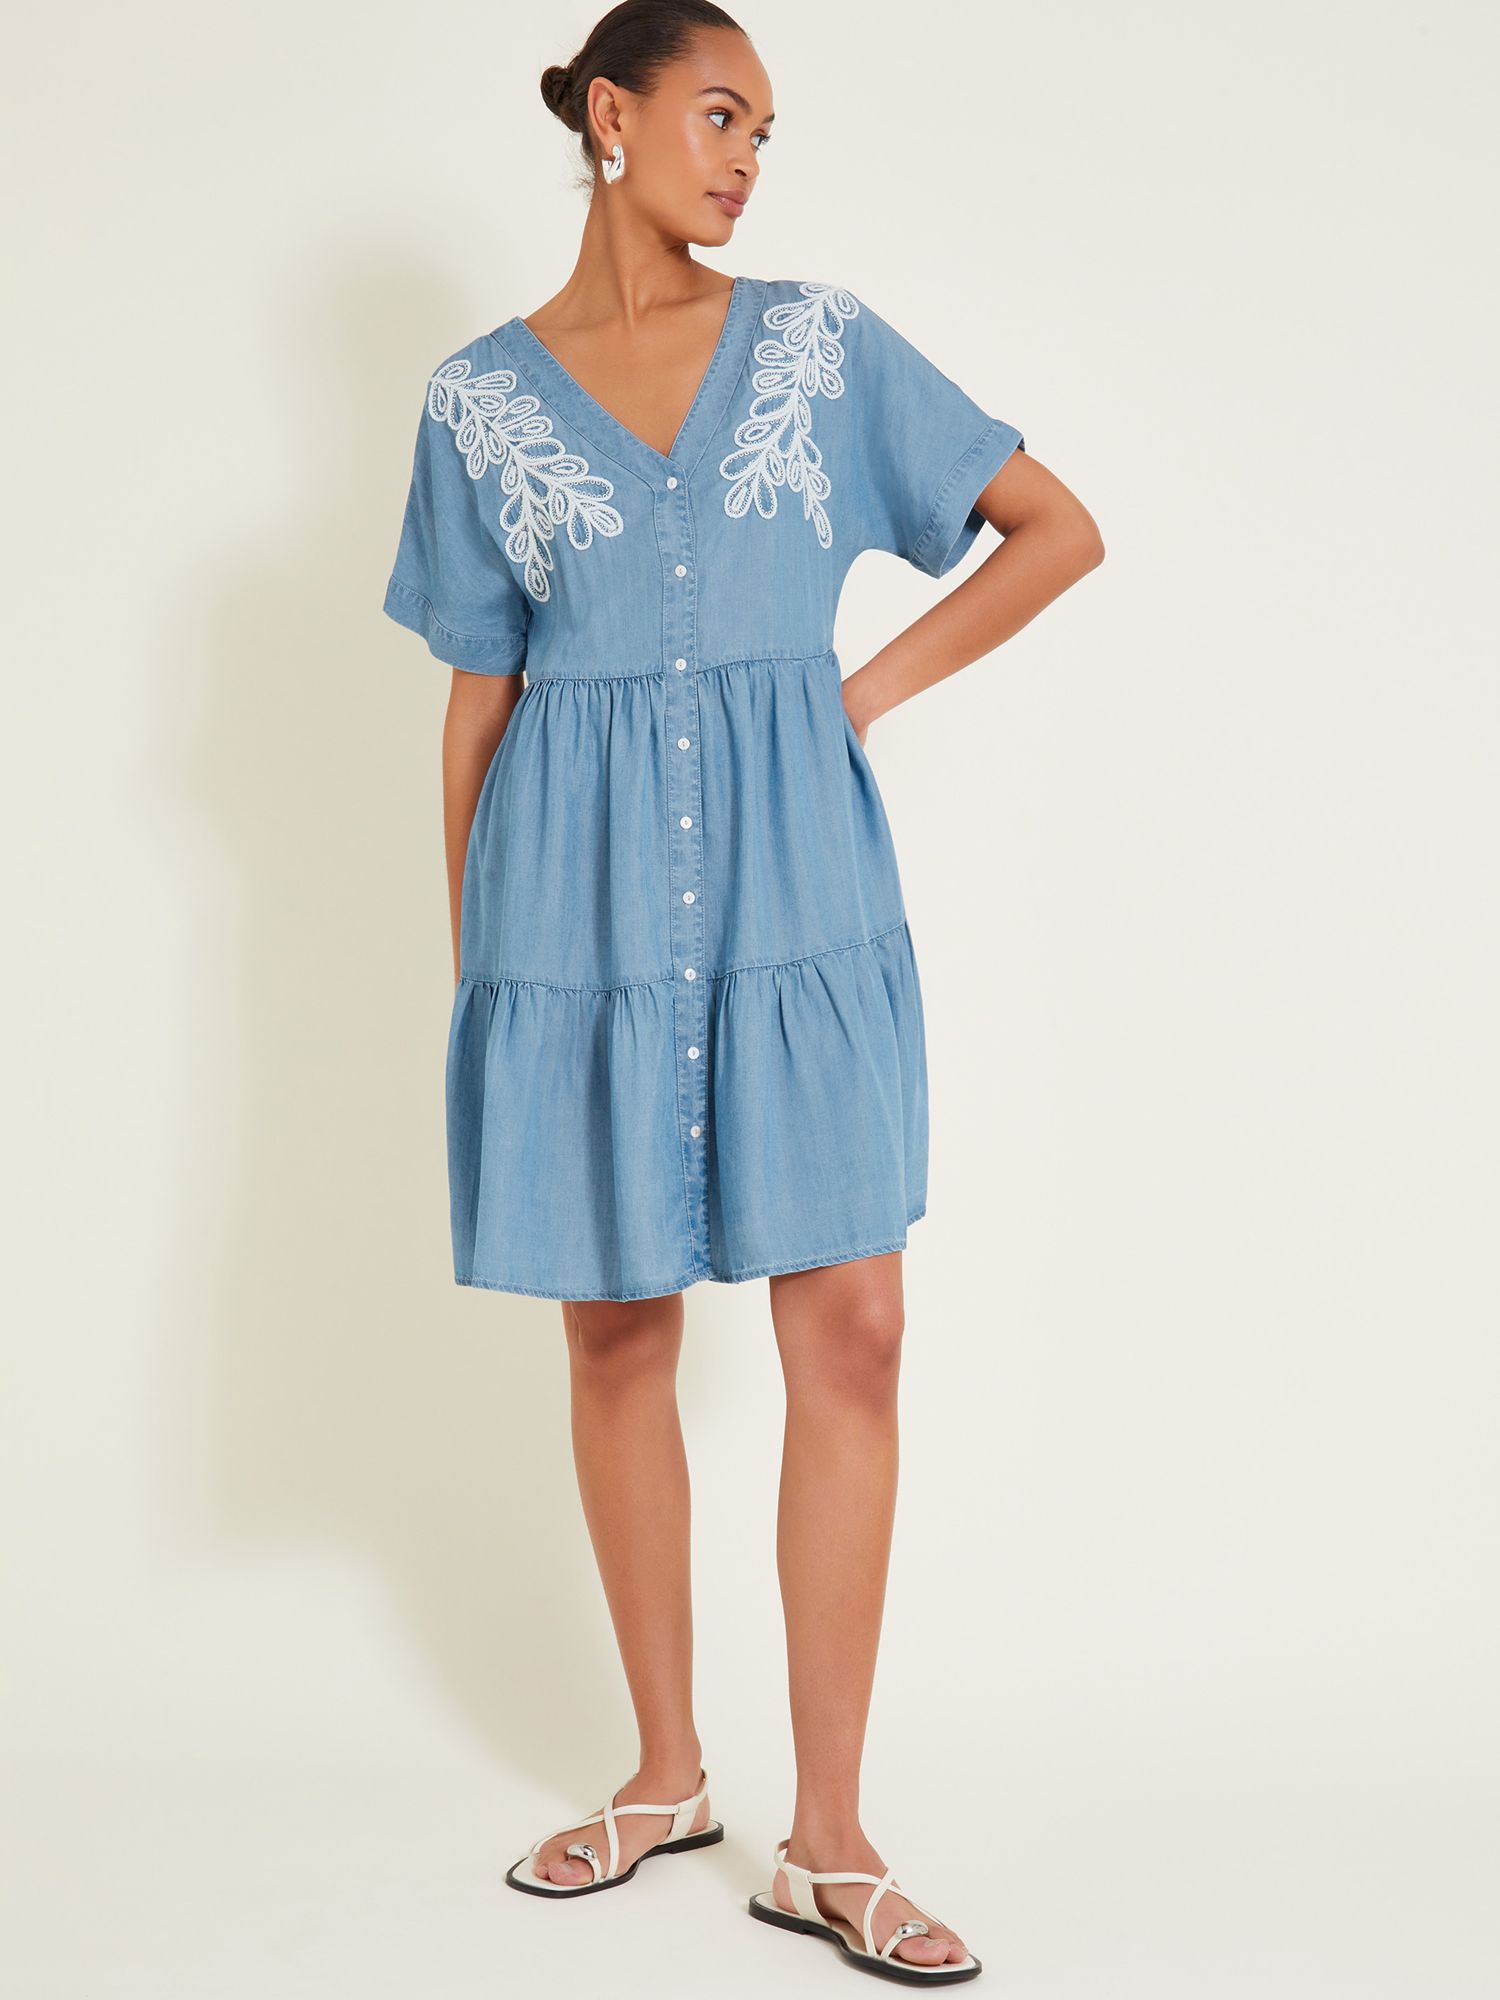 Monsoon Lacy Embroidery Detail Tiered Dress, Denim Blue, S